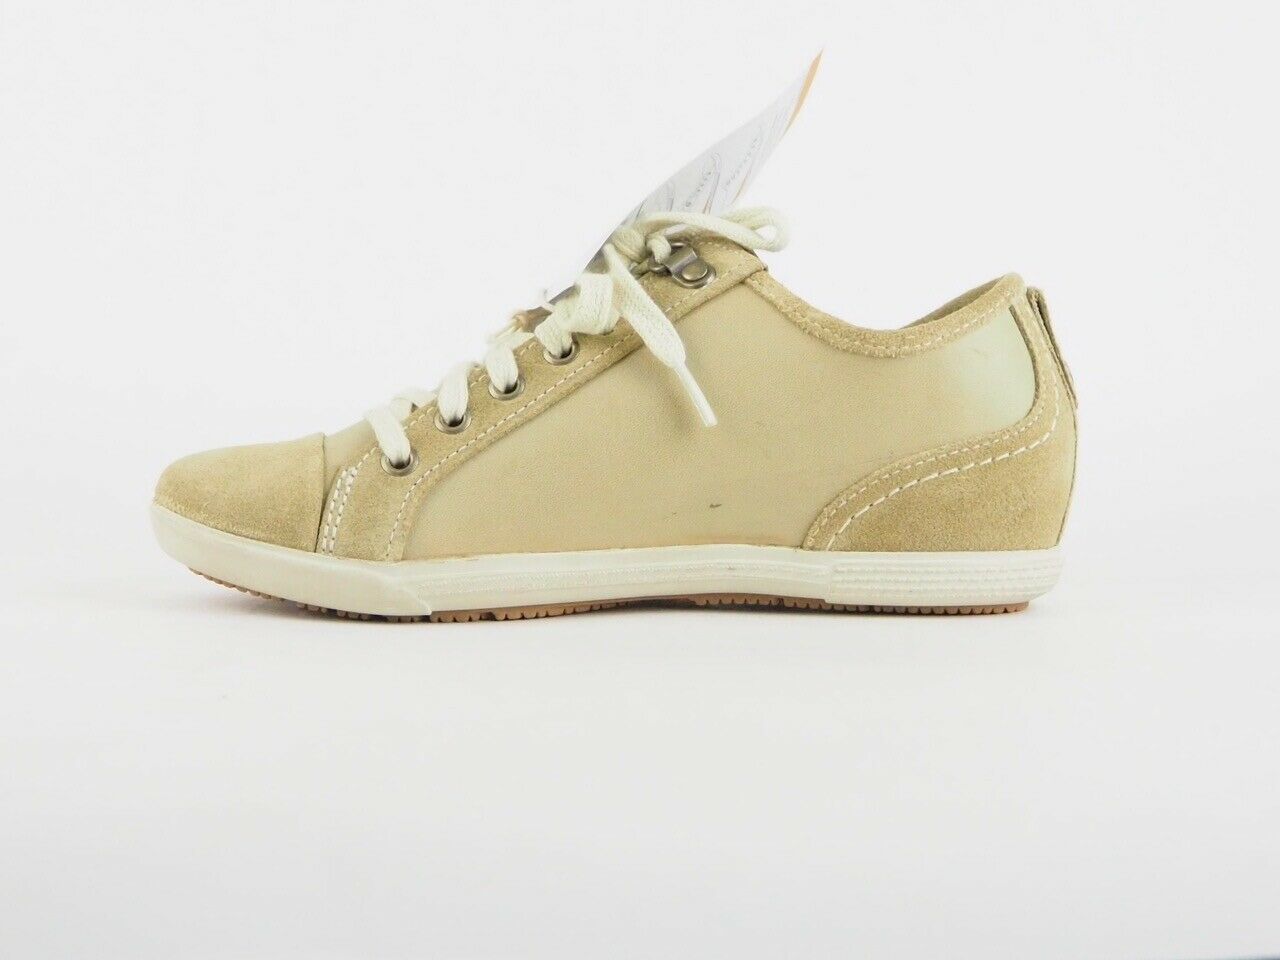 Womens Timberland Earthkeepers Oxford 3304R Beige Leather Lace Up Hi Light Shoes - London Top Style